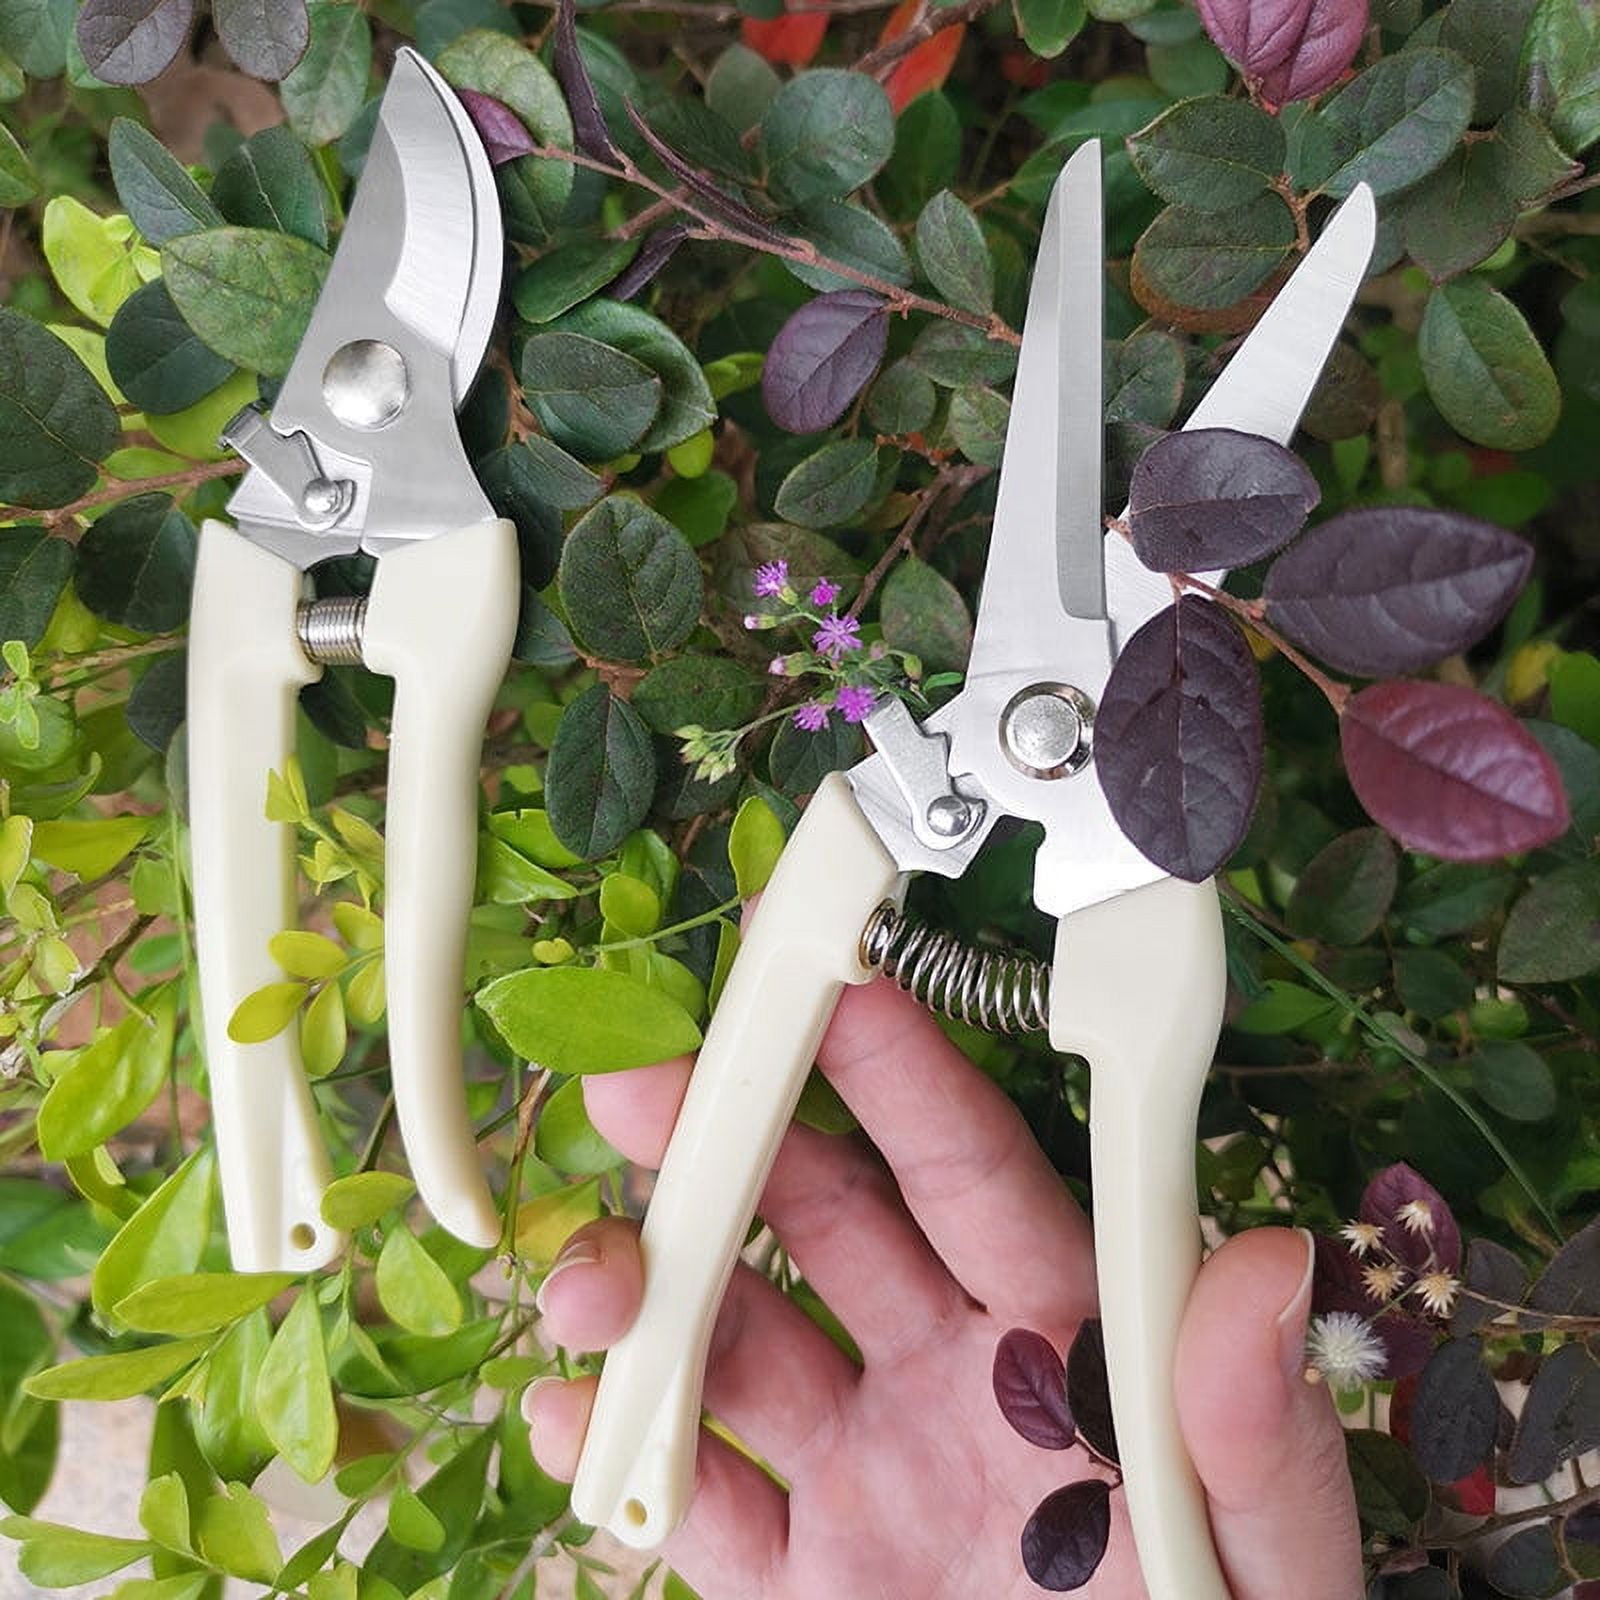 Professional Hand Pruner Bypass Pruning Shears with Safety Lock, Tree  Trimmers Secateurs, Garden Shears, Clippers for the Garden Random color 